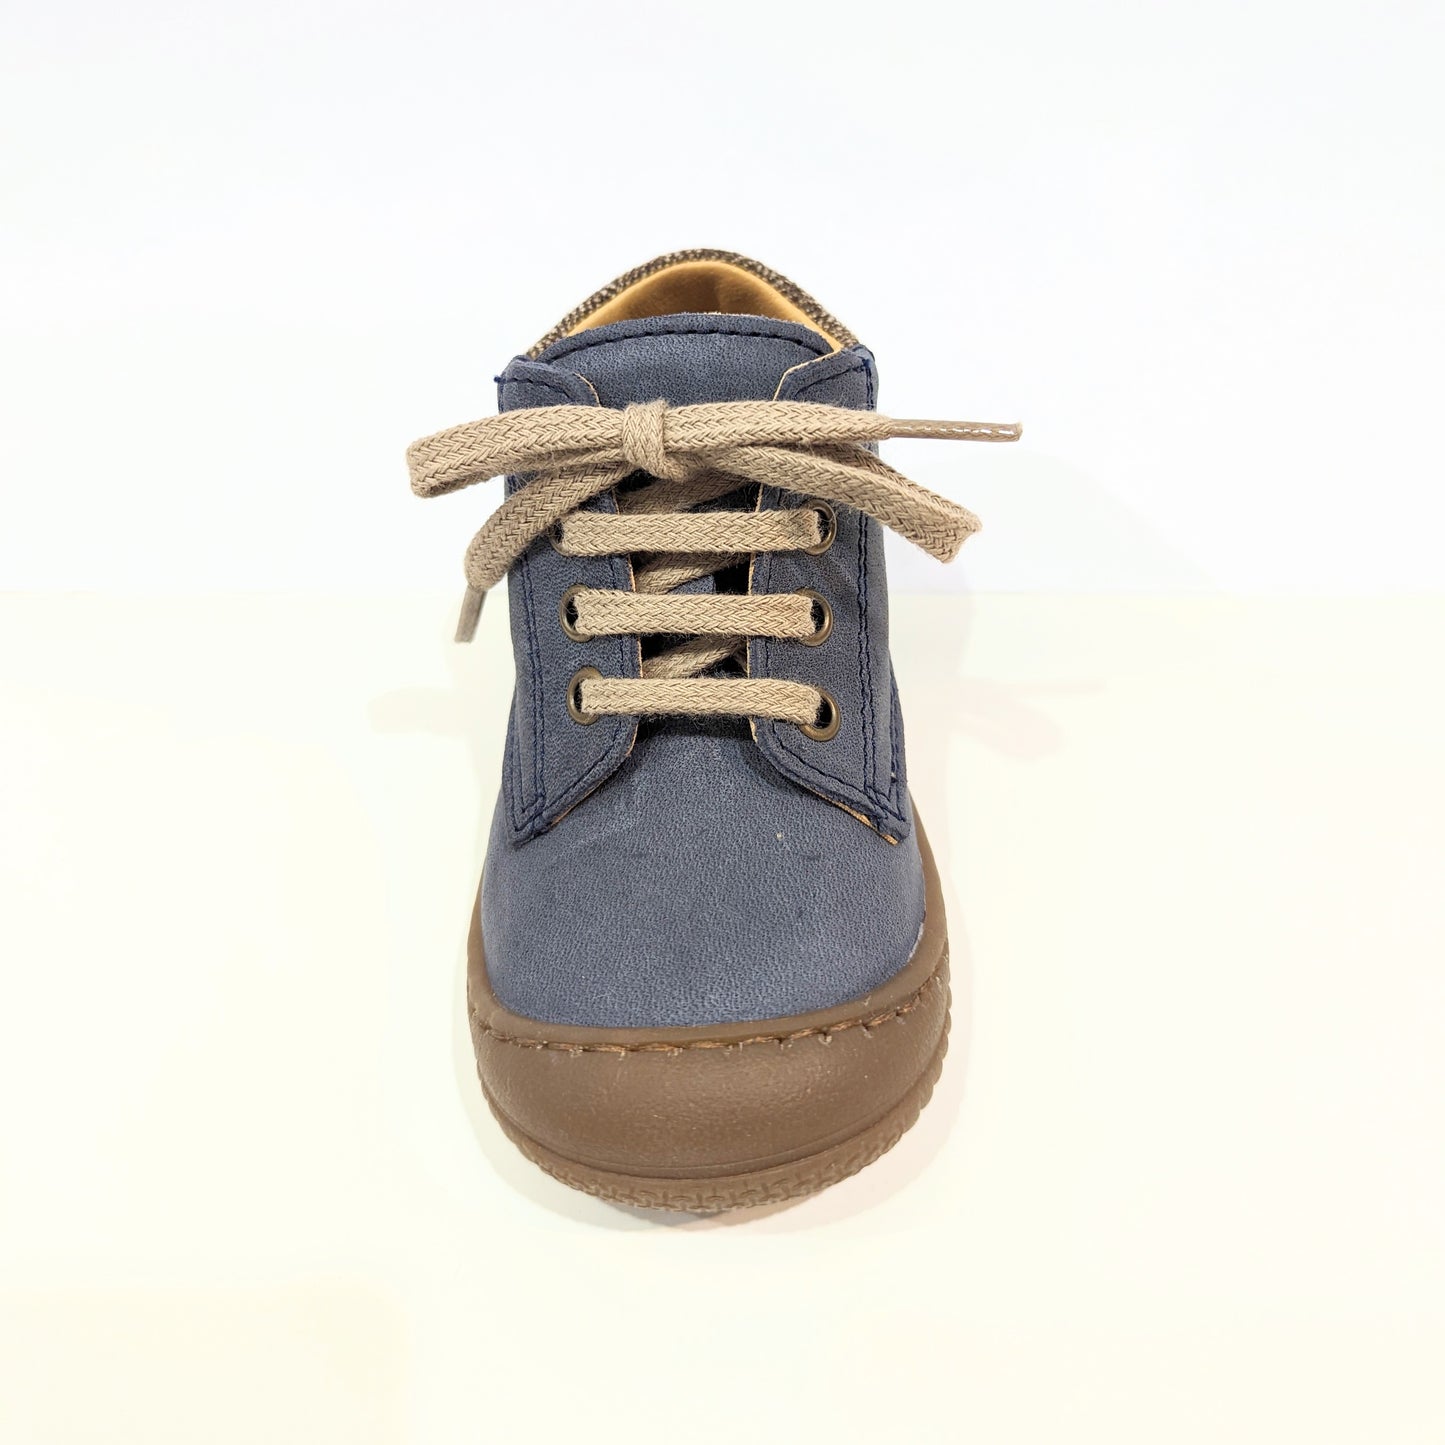 A boys ankle boot by Bopy ,style Jazo, in marine blue with lace and side zip fastening. Top view.